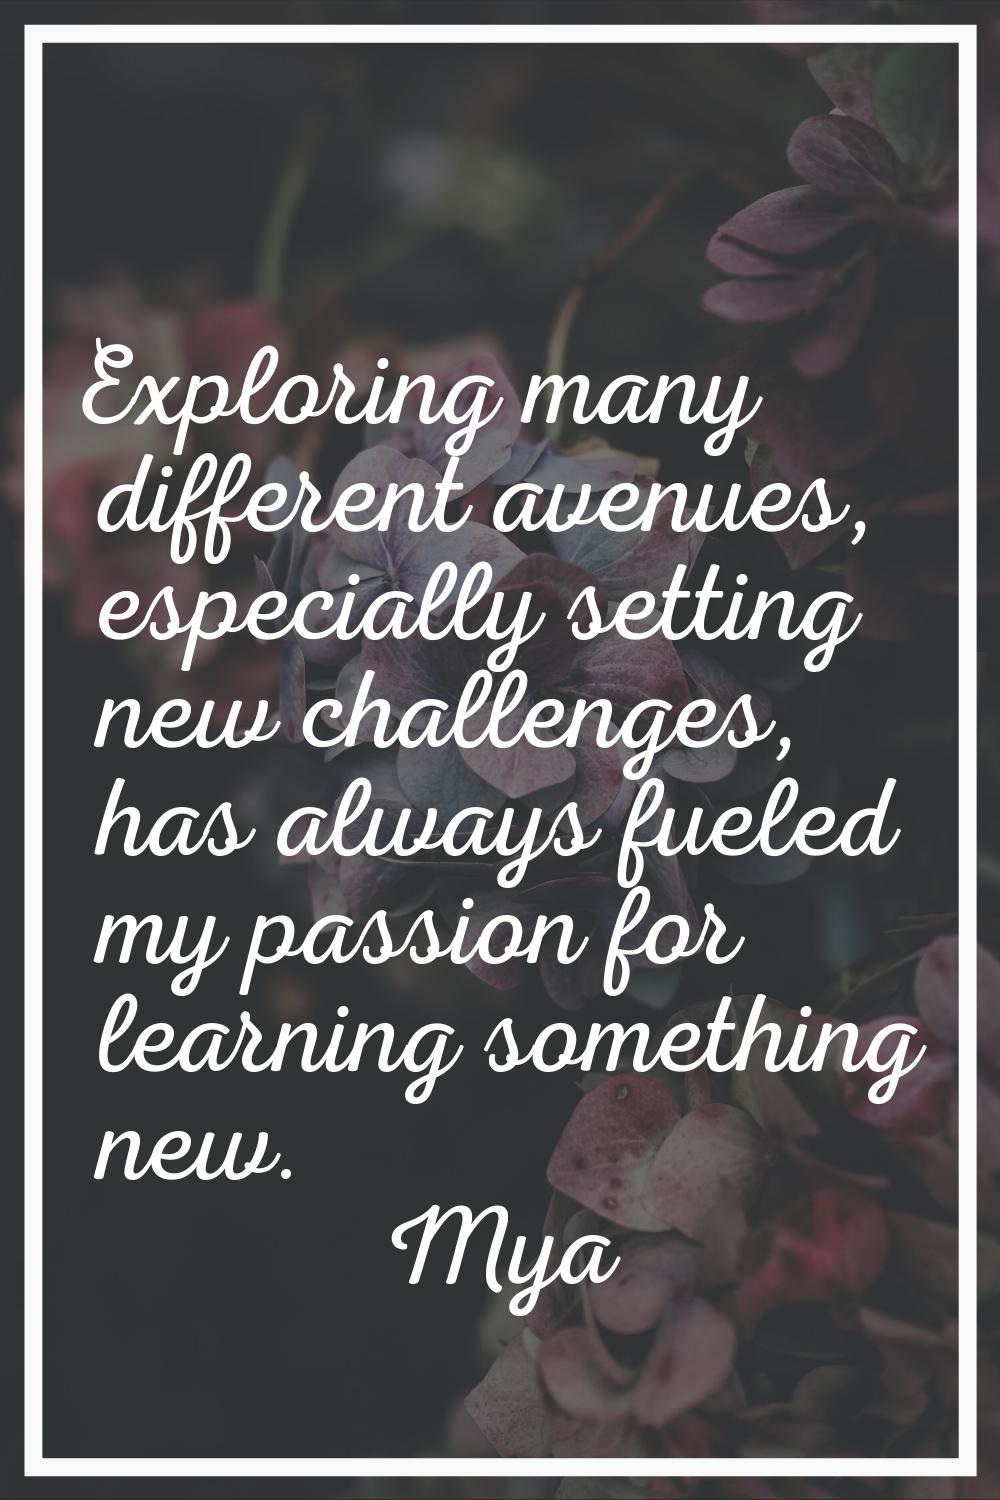 Exploring many different avenues, especially setting new challenges, has always fueled my passion f